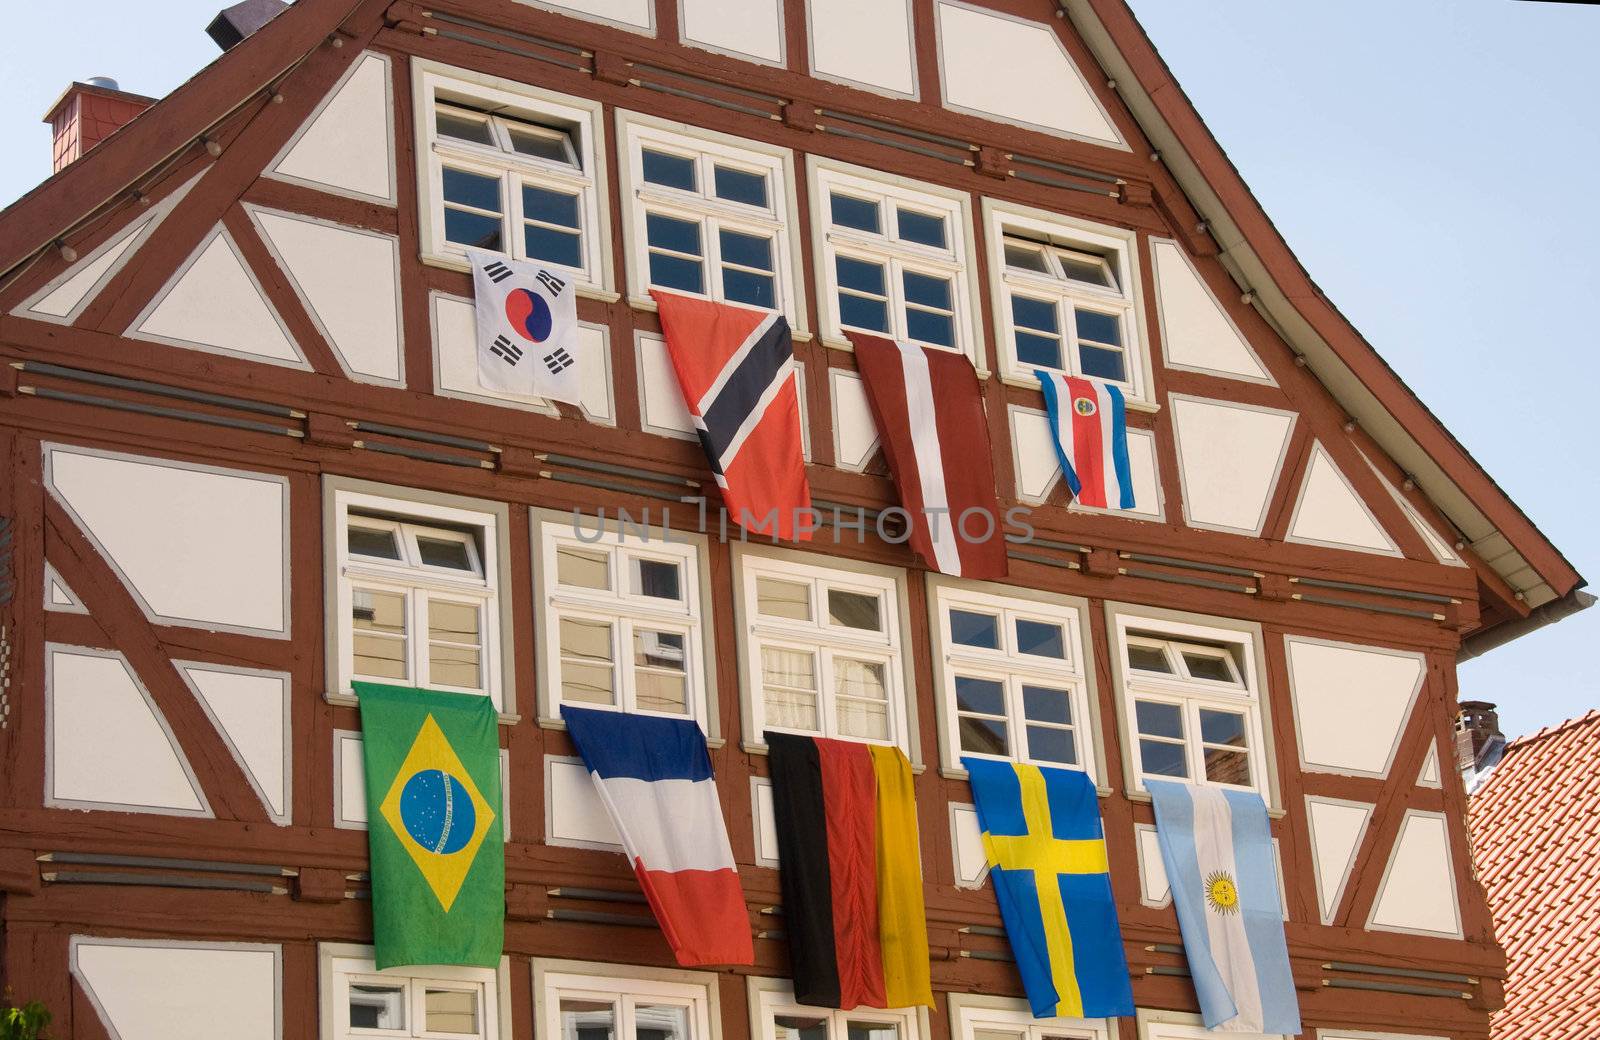 Flags of different countries on the background of half-timbered facade.